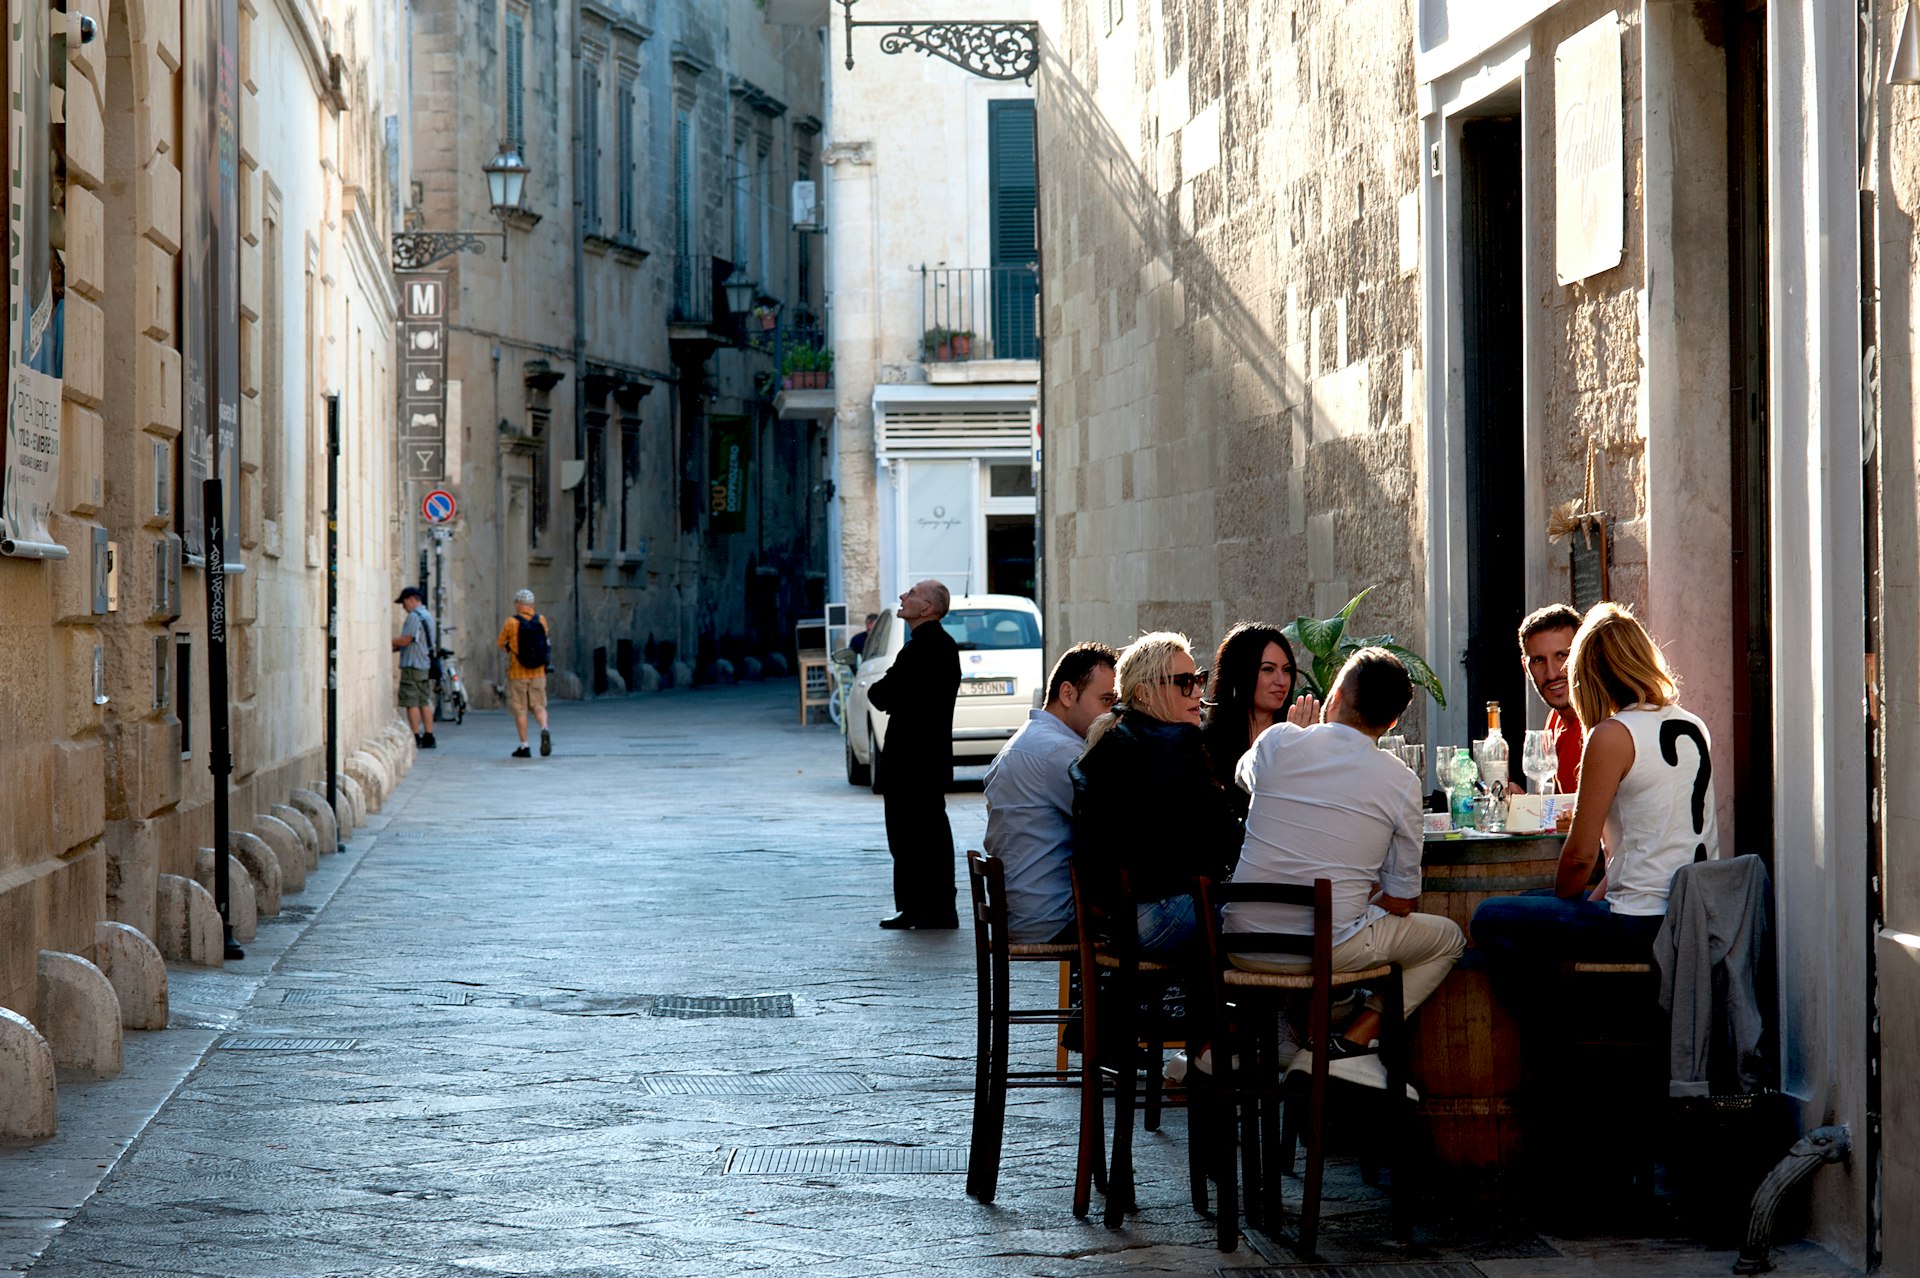 Friends enjoying a drink and get-together in a street cafe/bar in the city of Lecce, Salento, Puglia, Italy